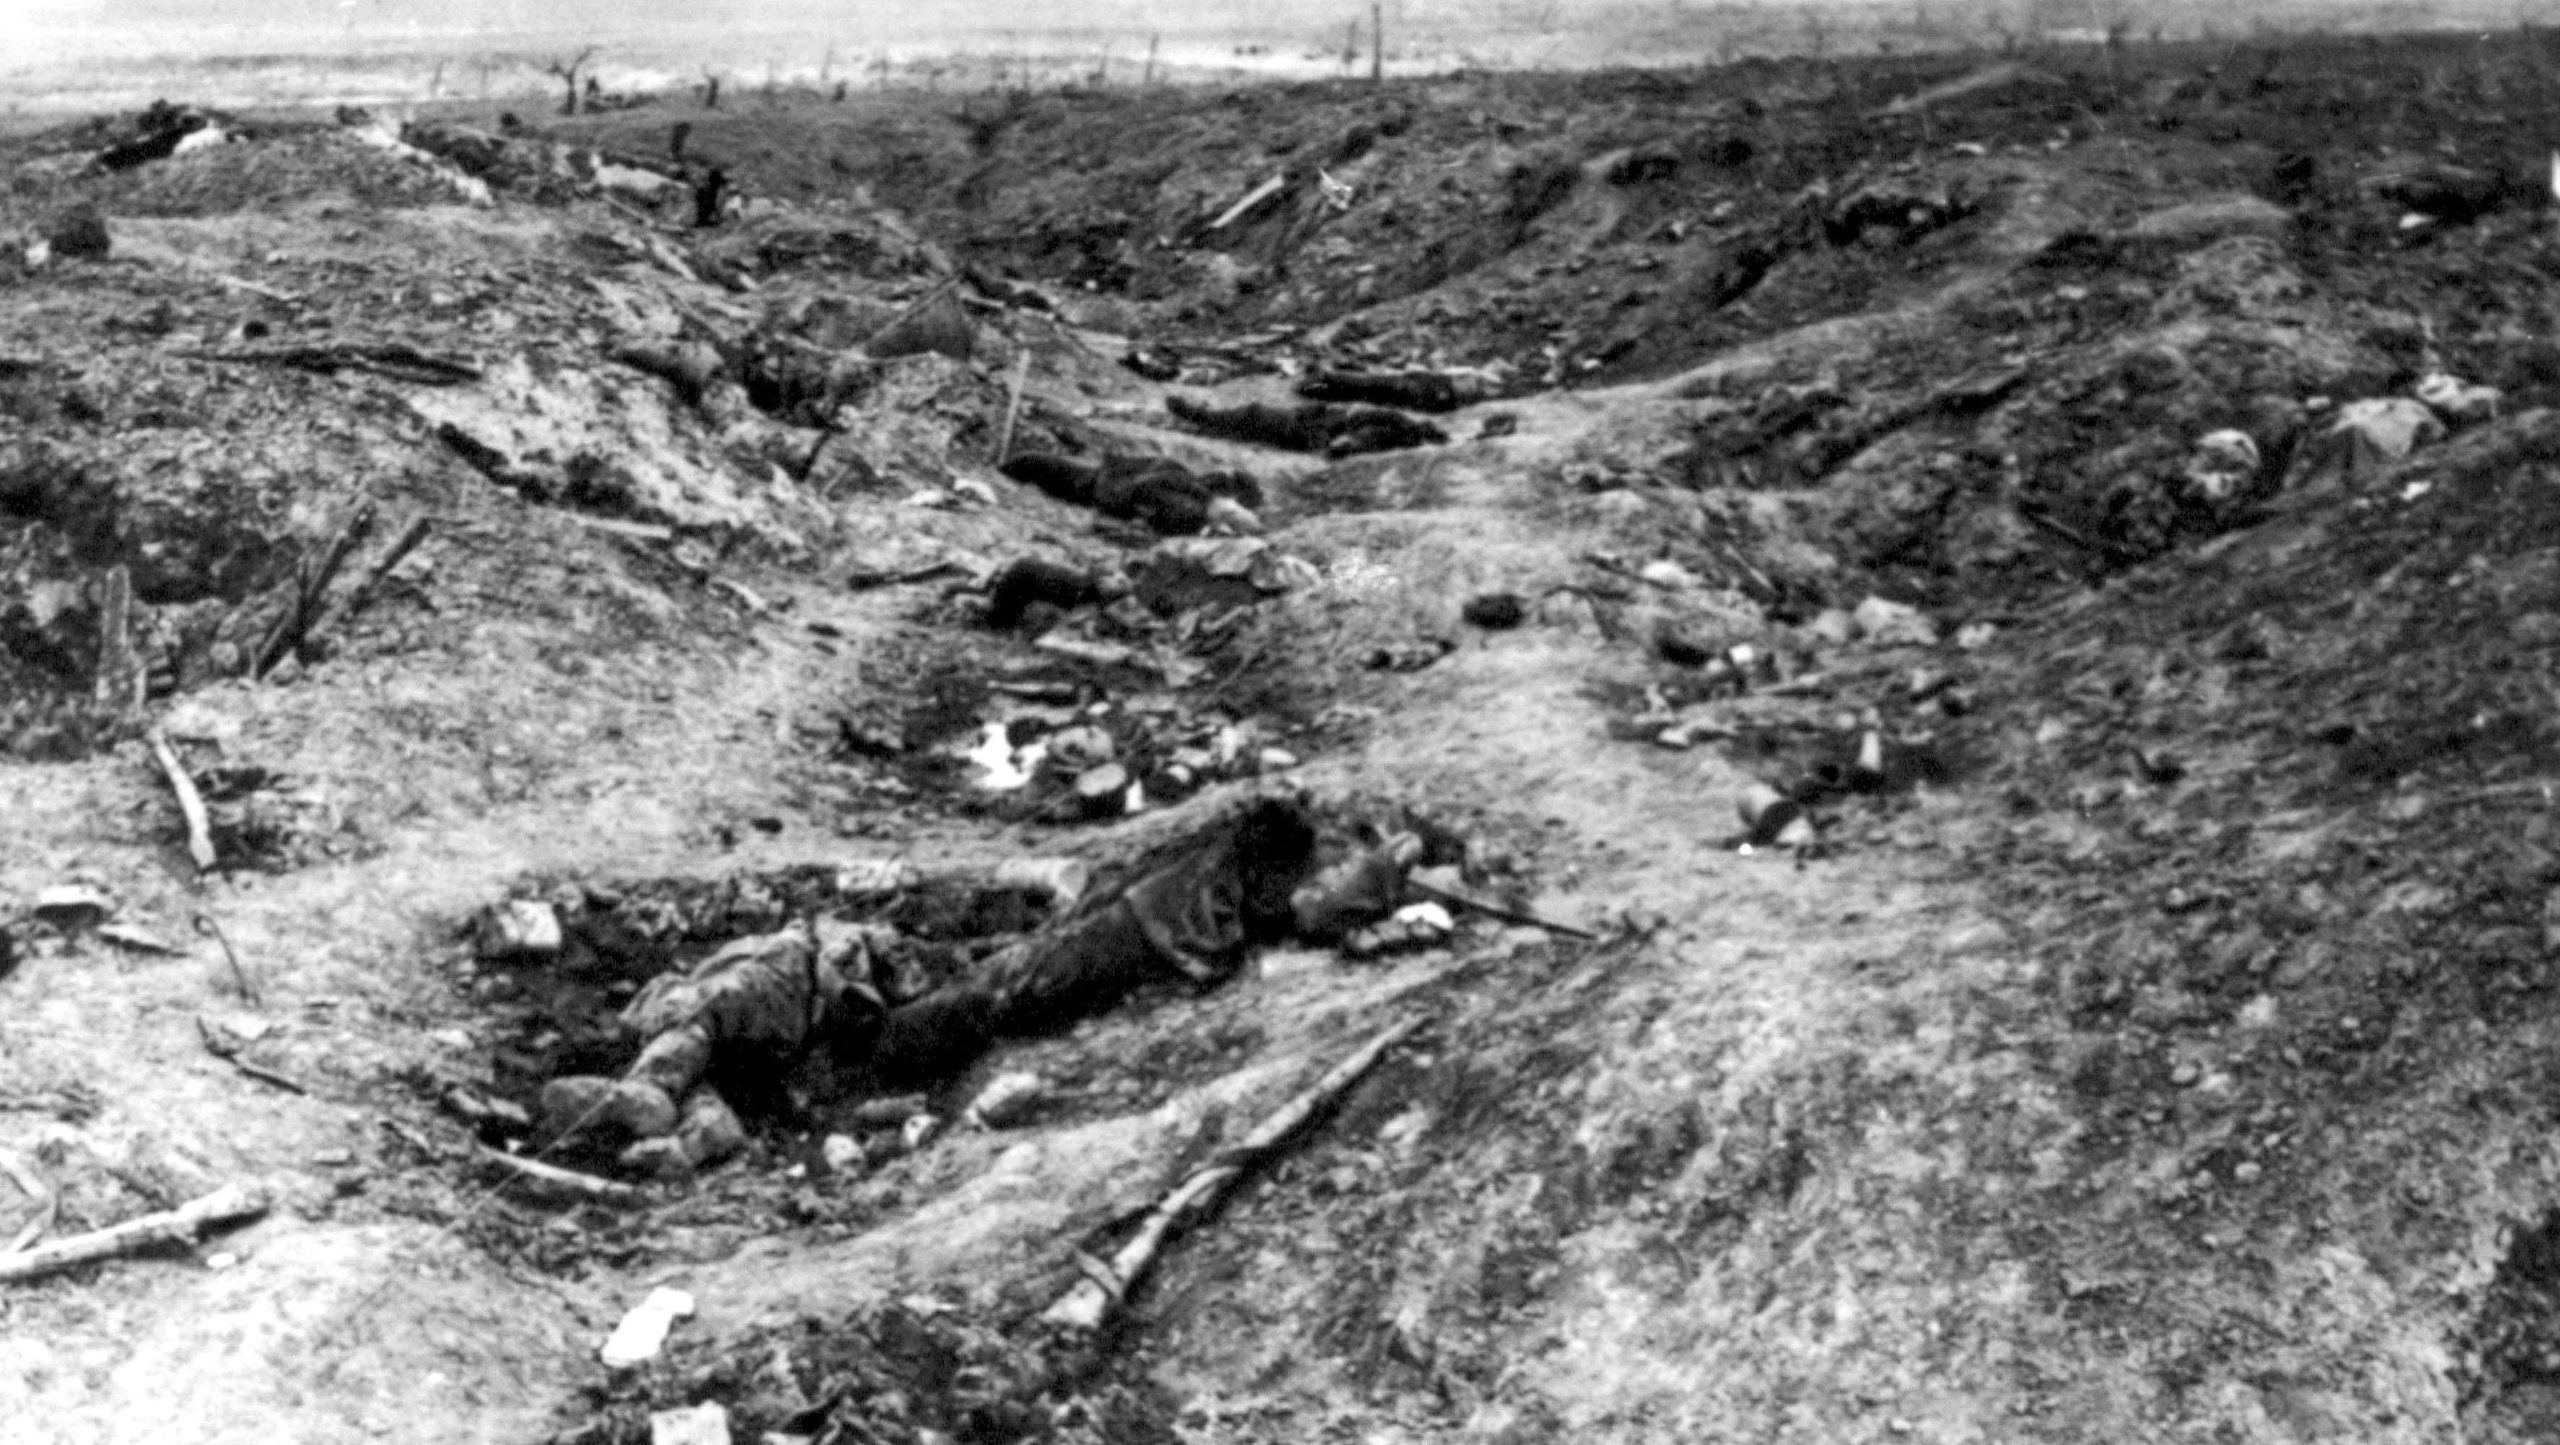 The Battle of the Somme raged for months and was a defining point in the four-year conflict,  where hundreds of thousands of lives were lost.